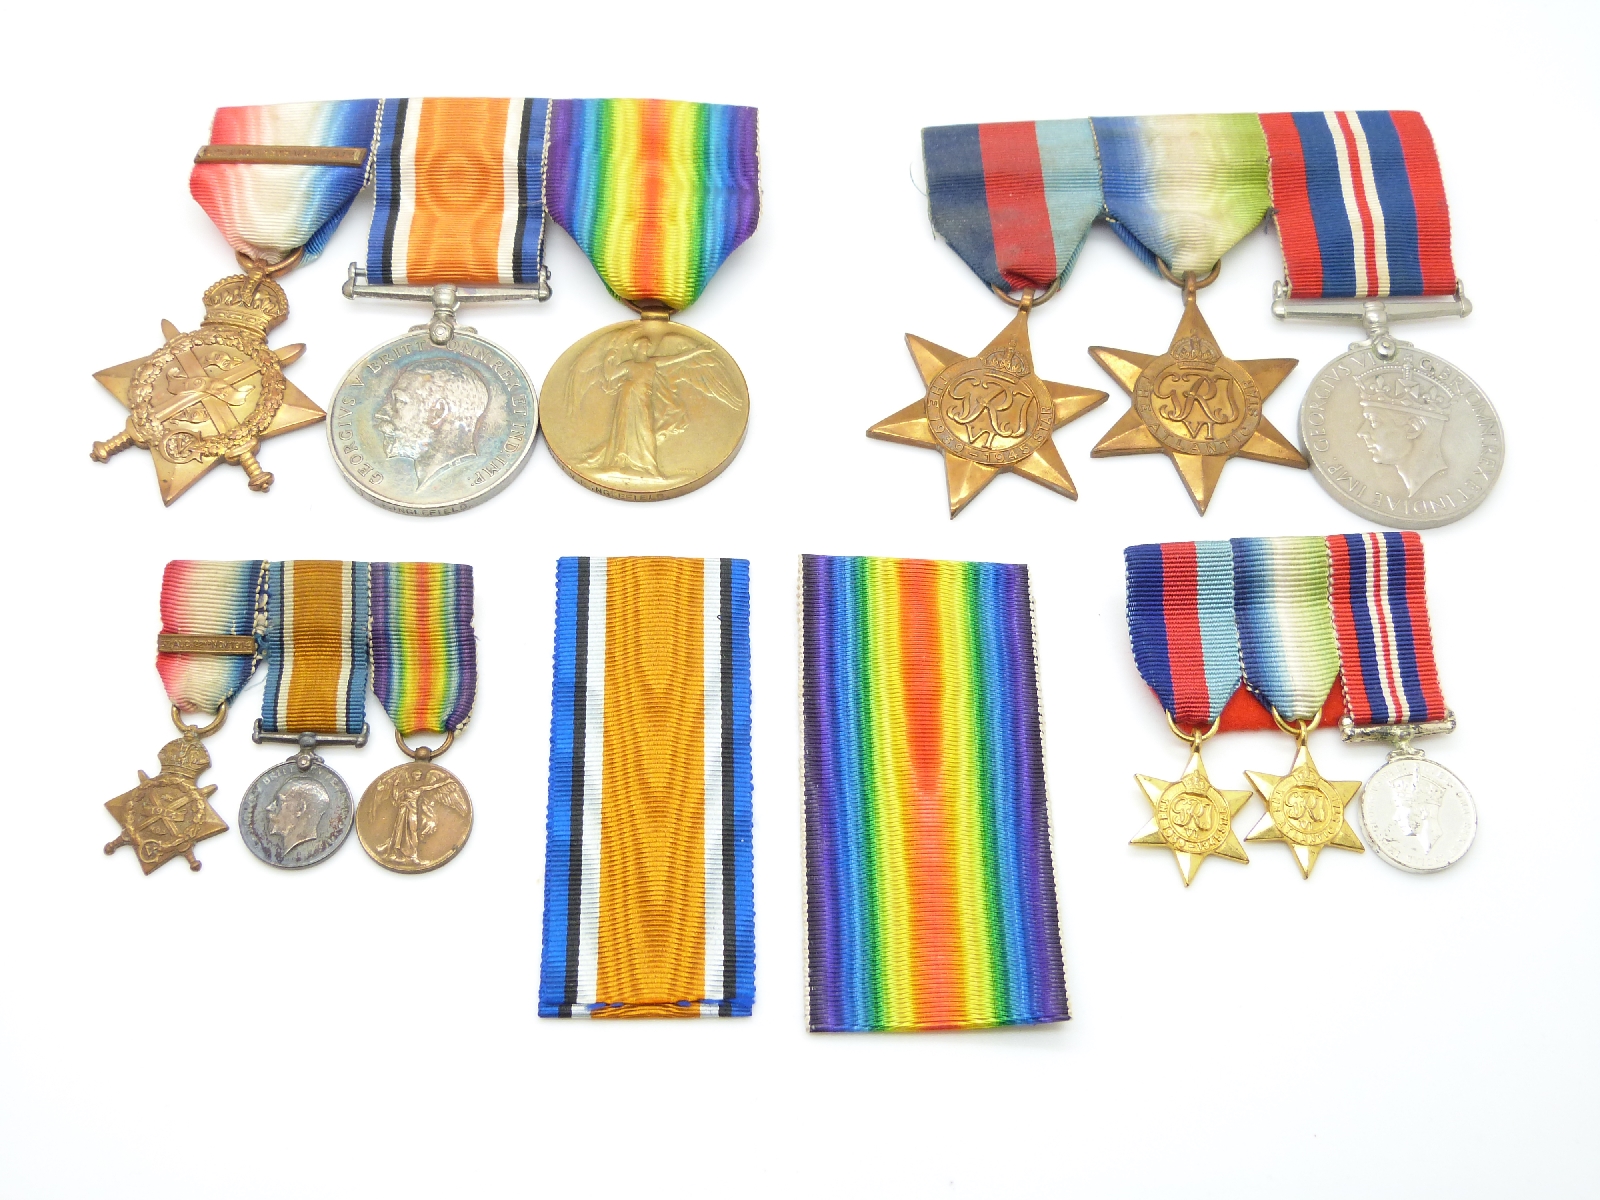 British Army WWI and WWII medal trios awarded to Lieutenant V E Inglefield East Yorkshire